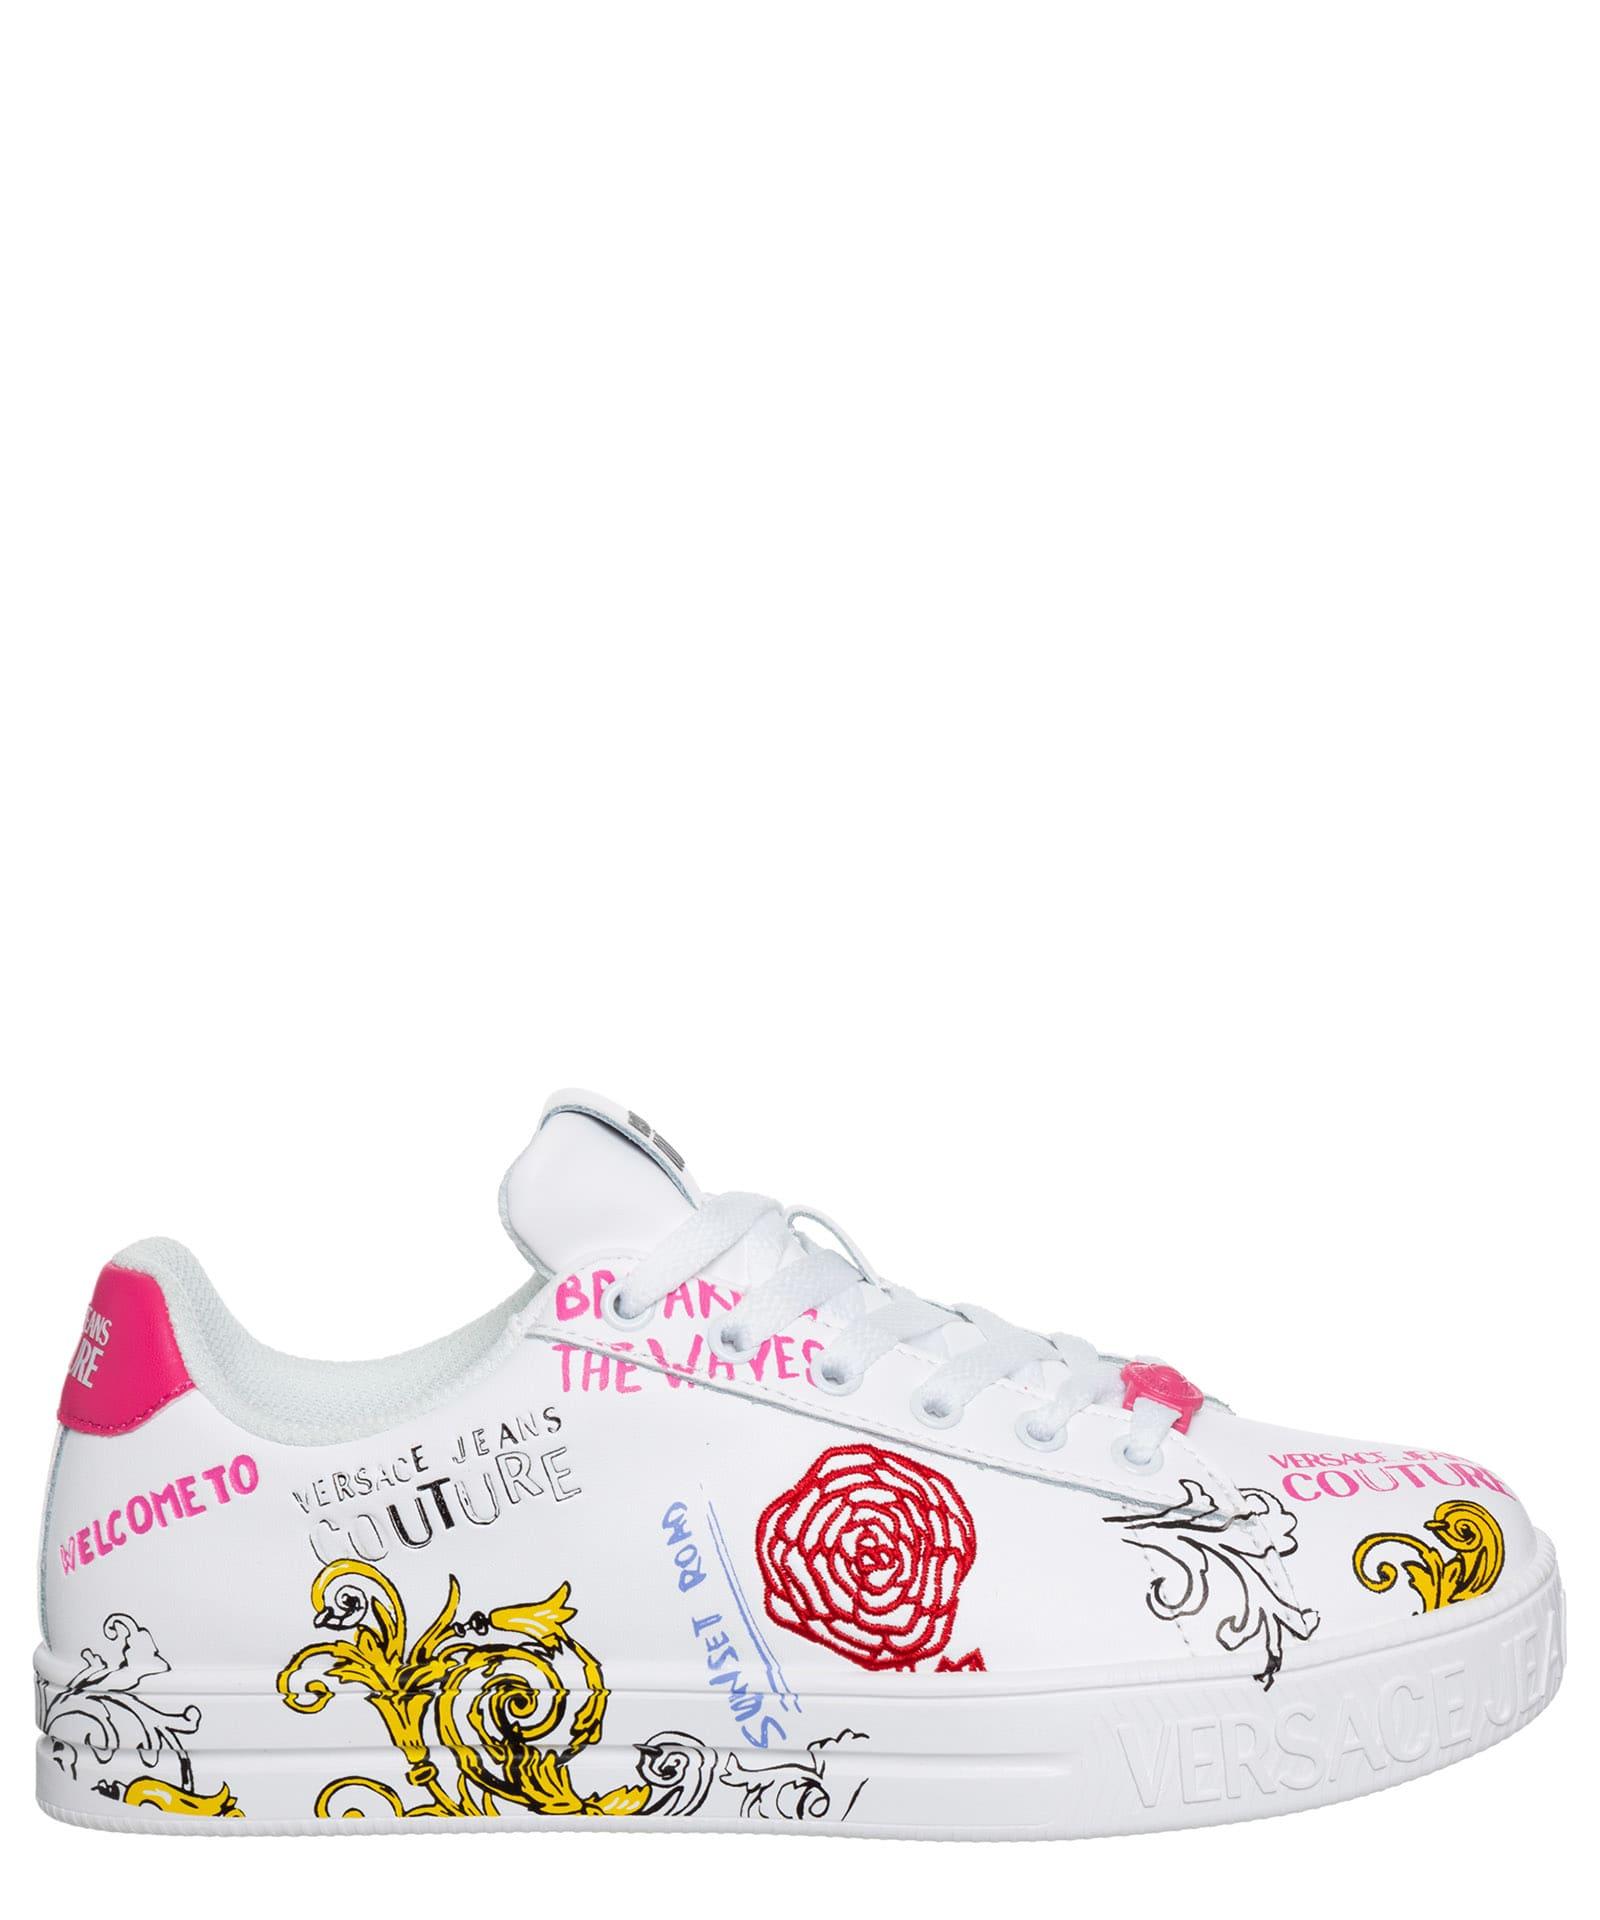 Versace Jeans Couture Court 88 Sneakers in White | Lyst